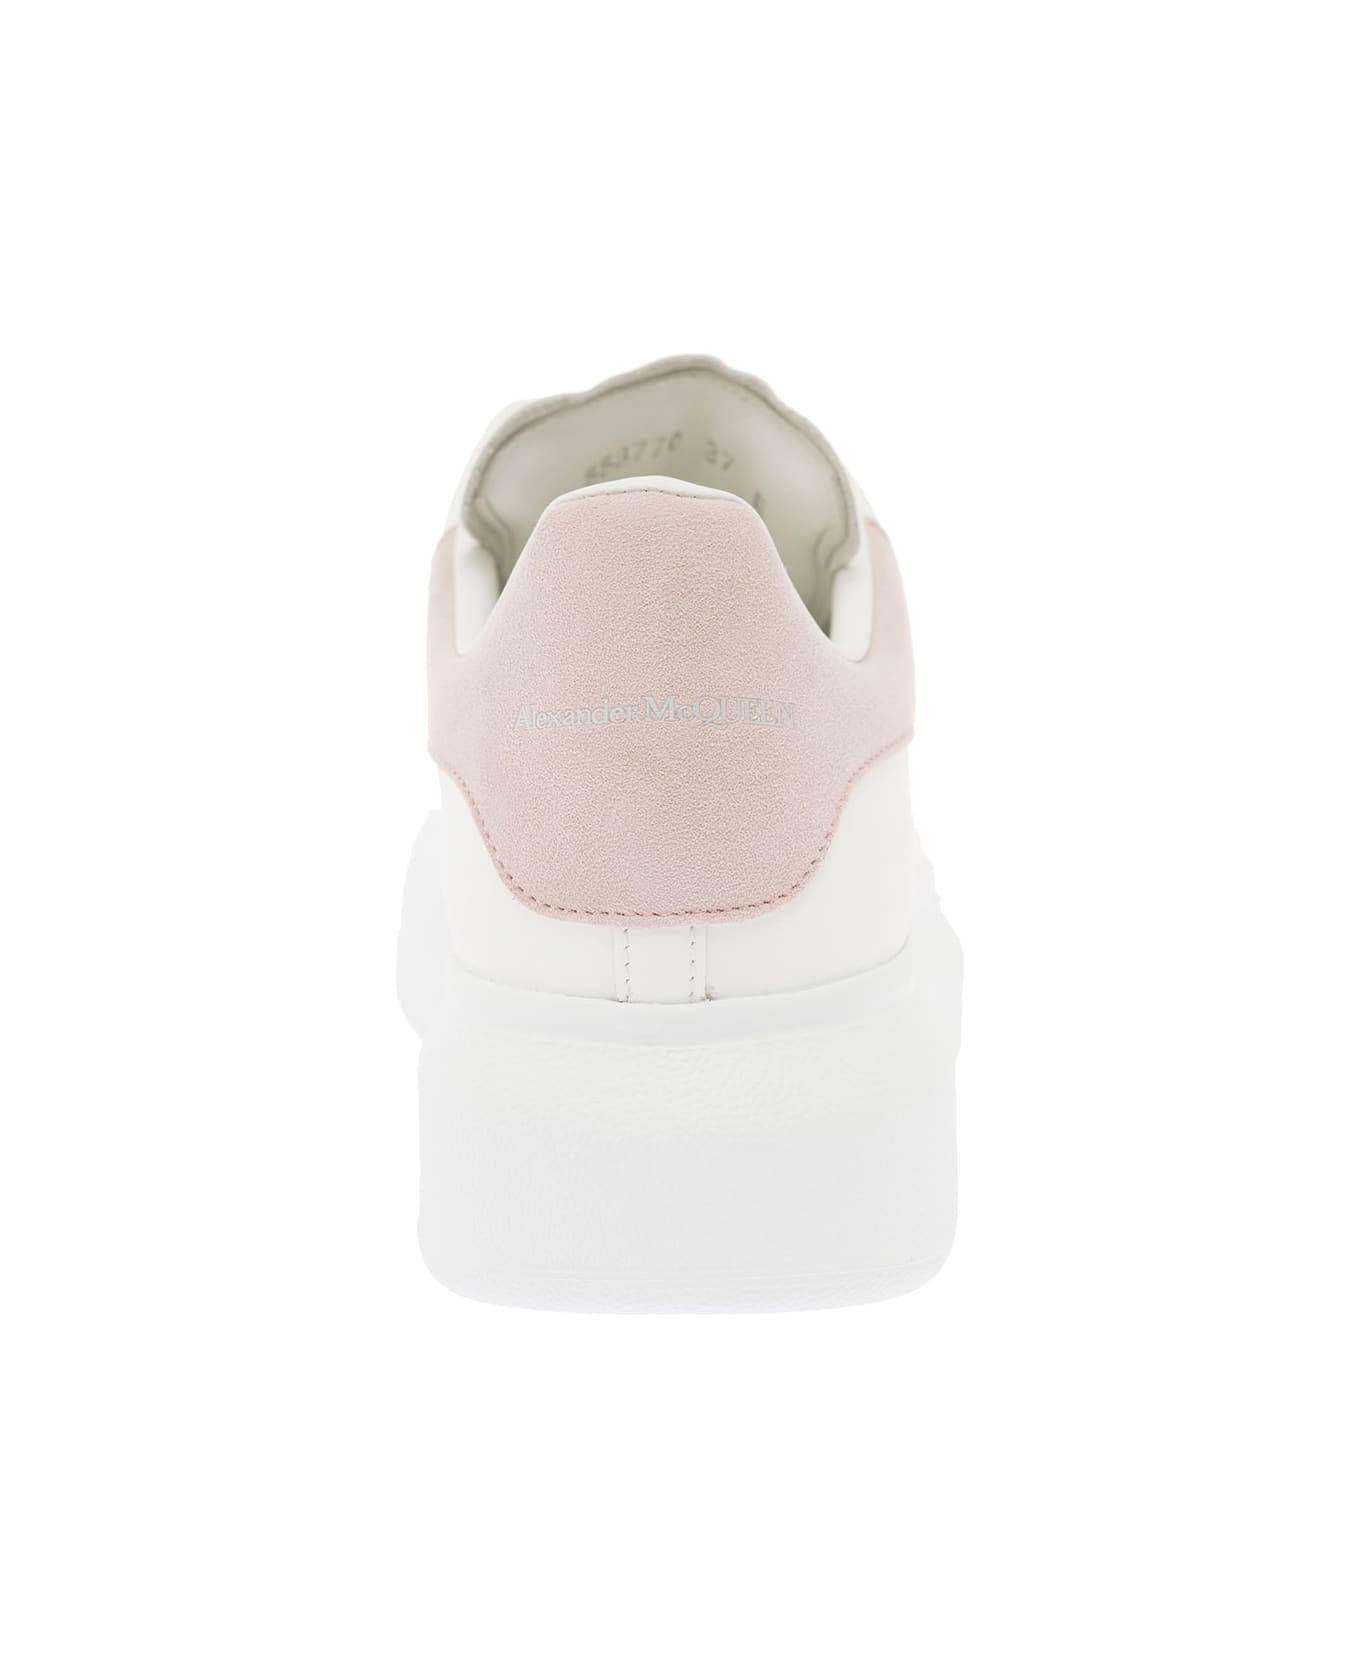 Alexander McQueen Woman's Oversize White And Pink Leather Sneakers - White